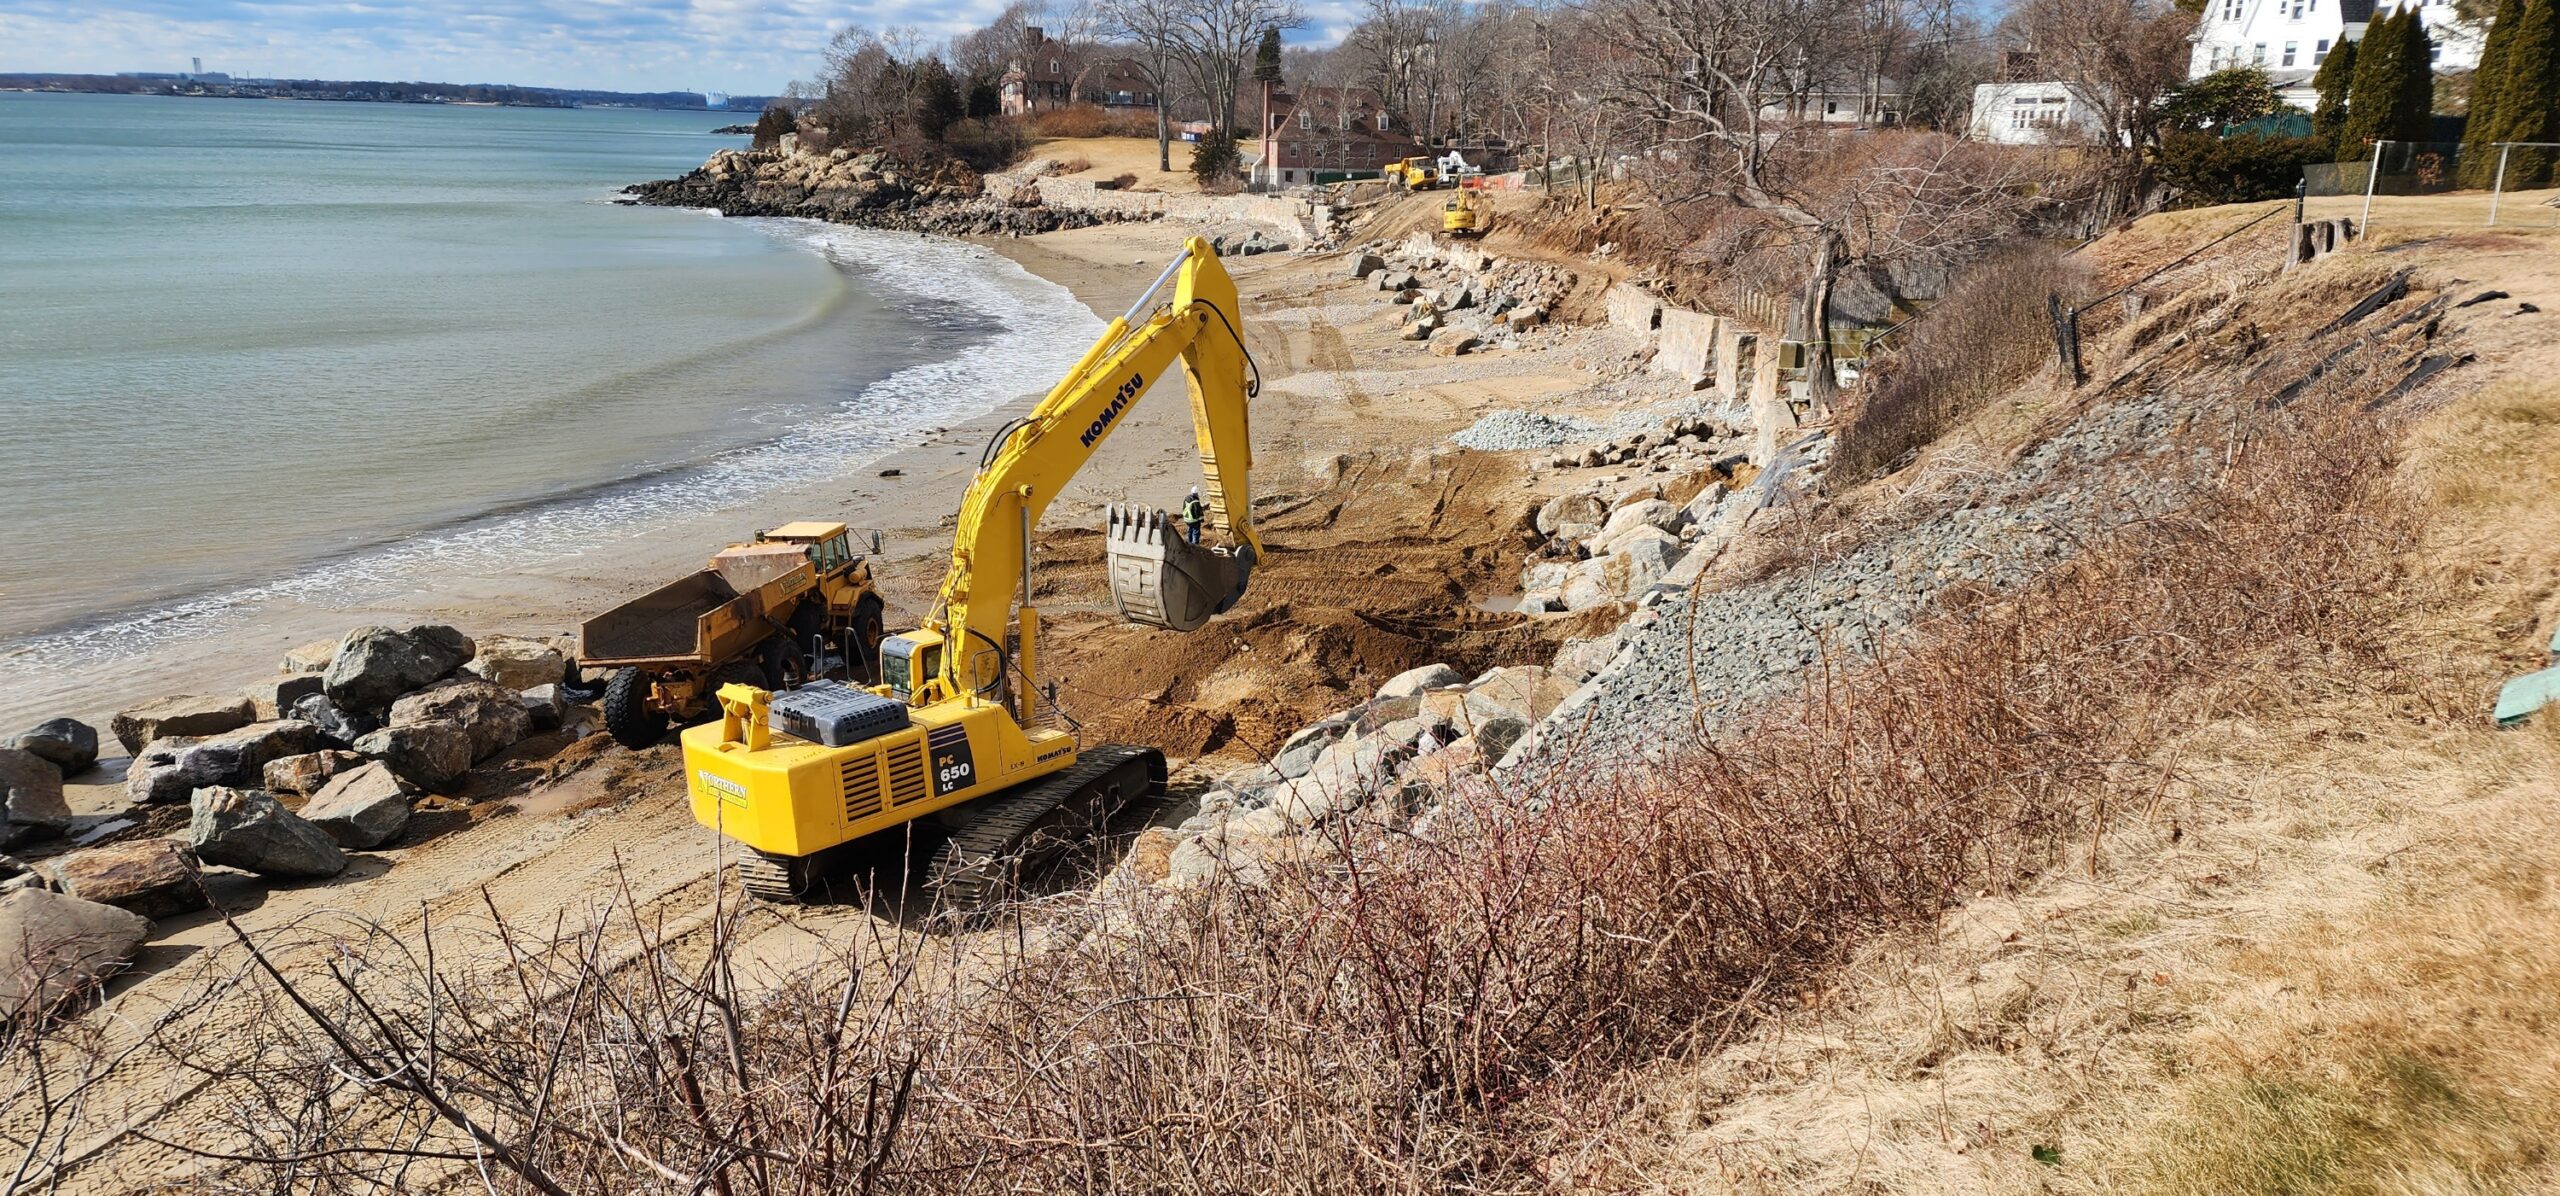 Construction equipment along coast for seawall project